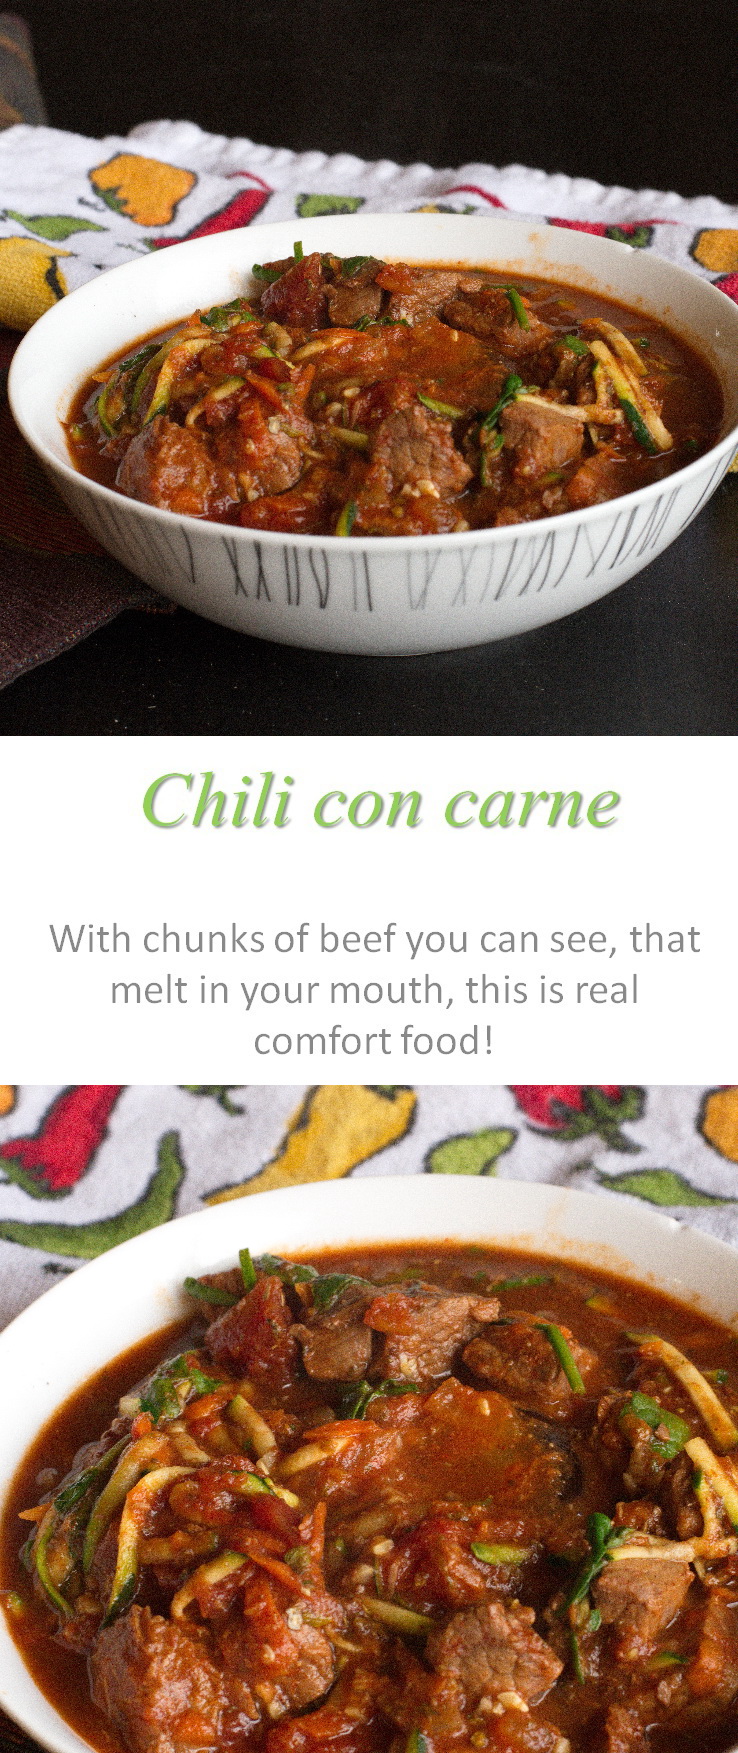 Cook at home | Slow-cooker chili con carne - Cook at Home